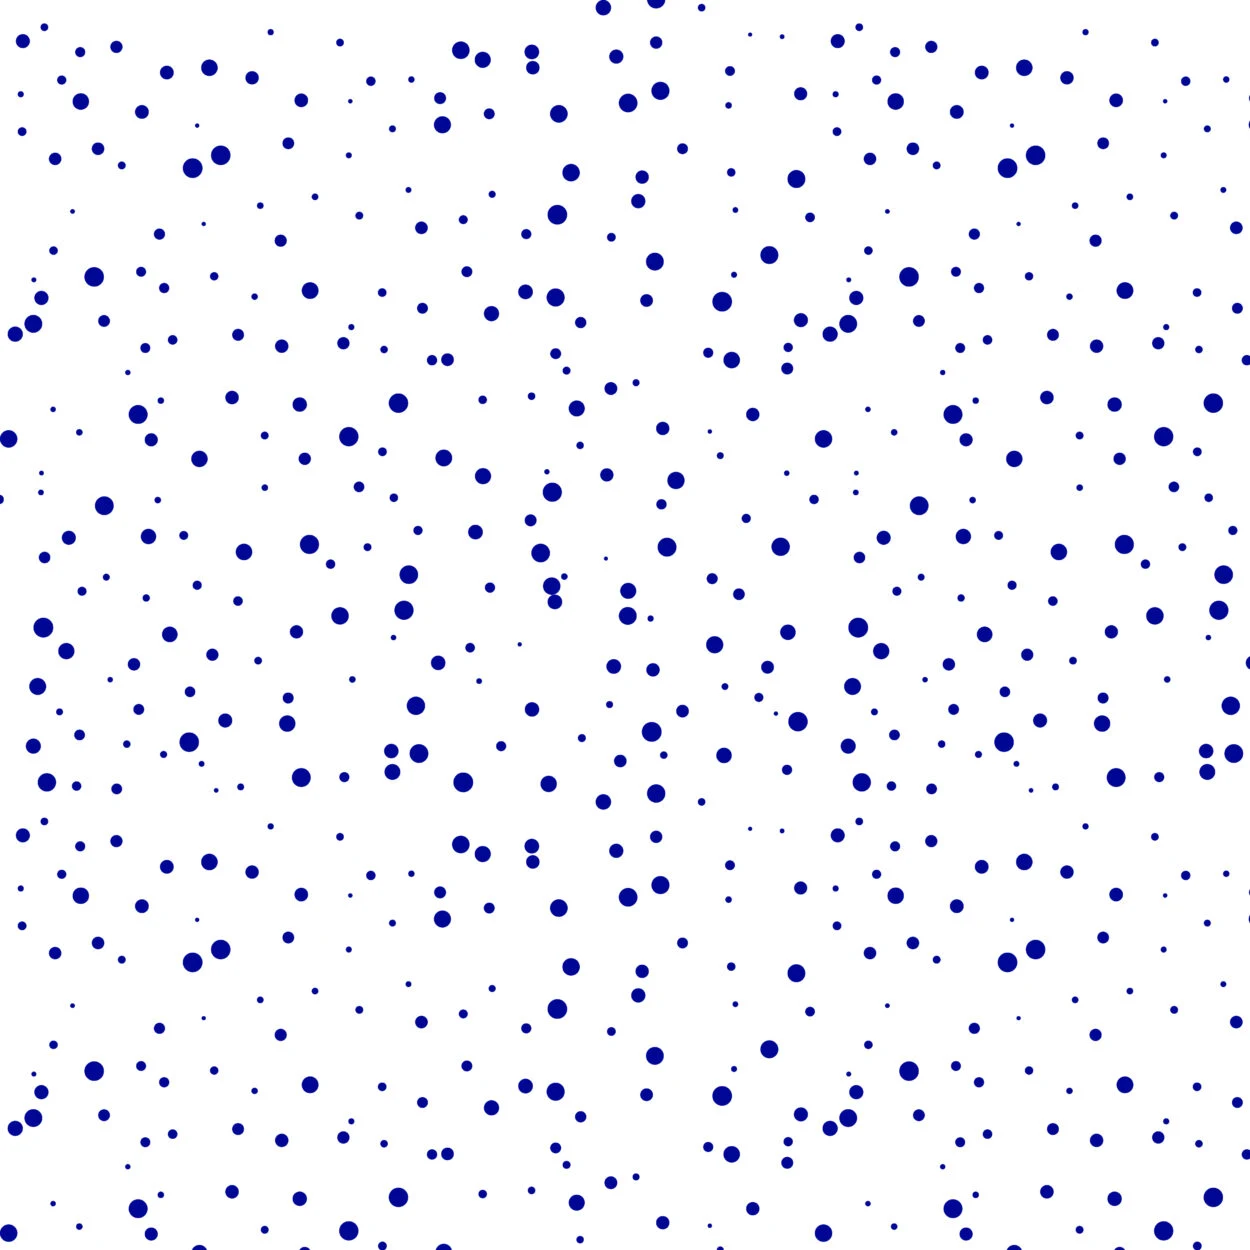 Multiple different sized blue dots on a white background